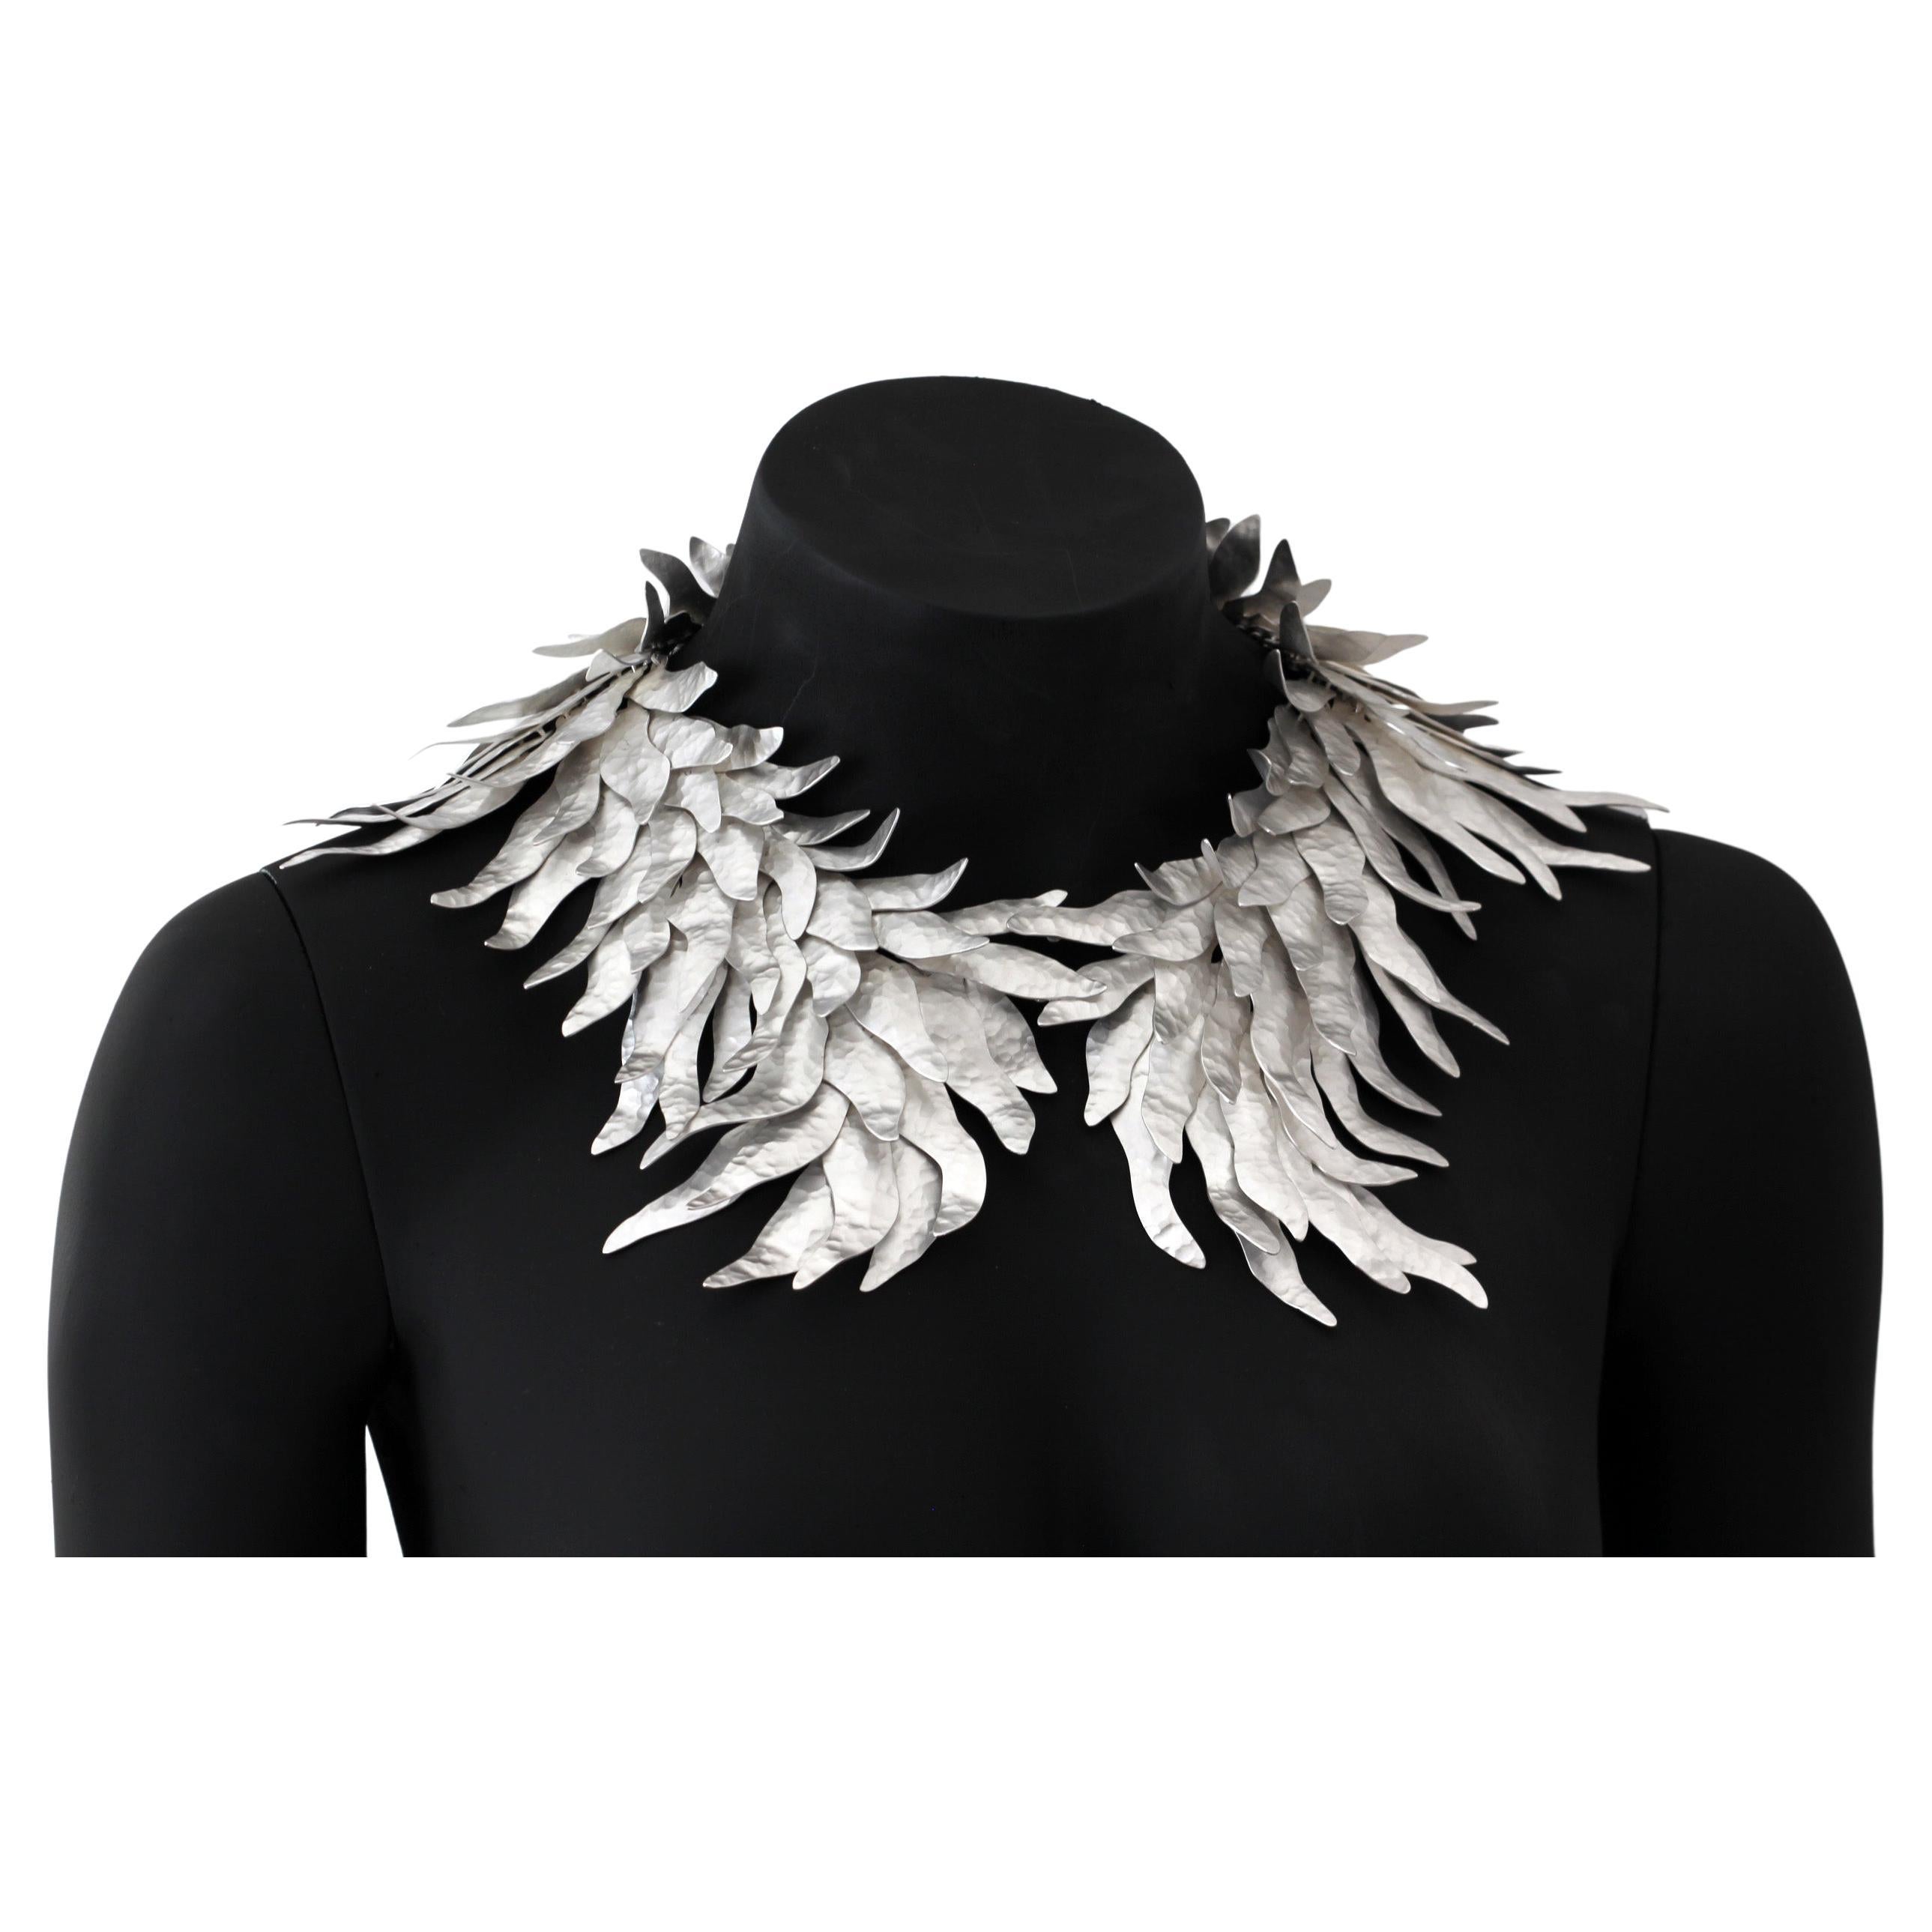 "Feathers" Silver Necklace by Romoherrera For Sale